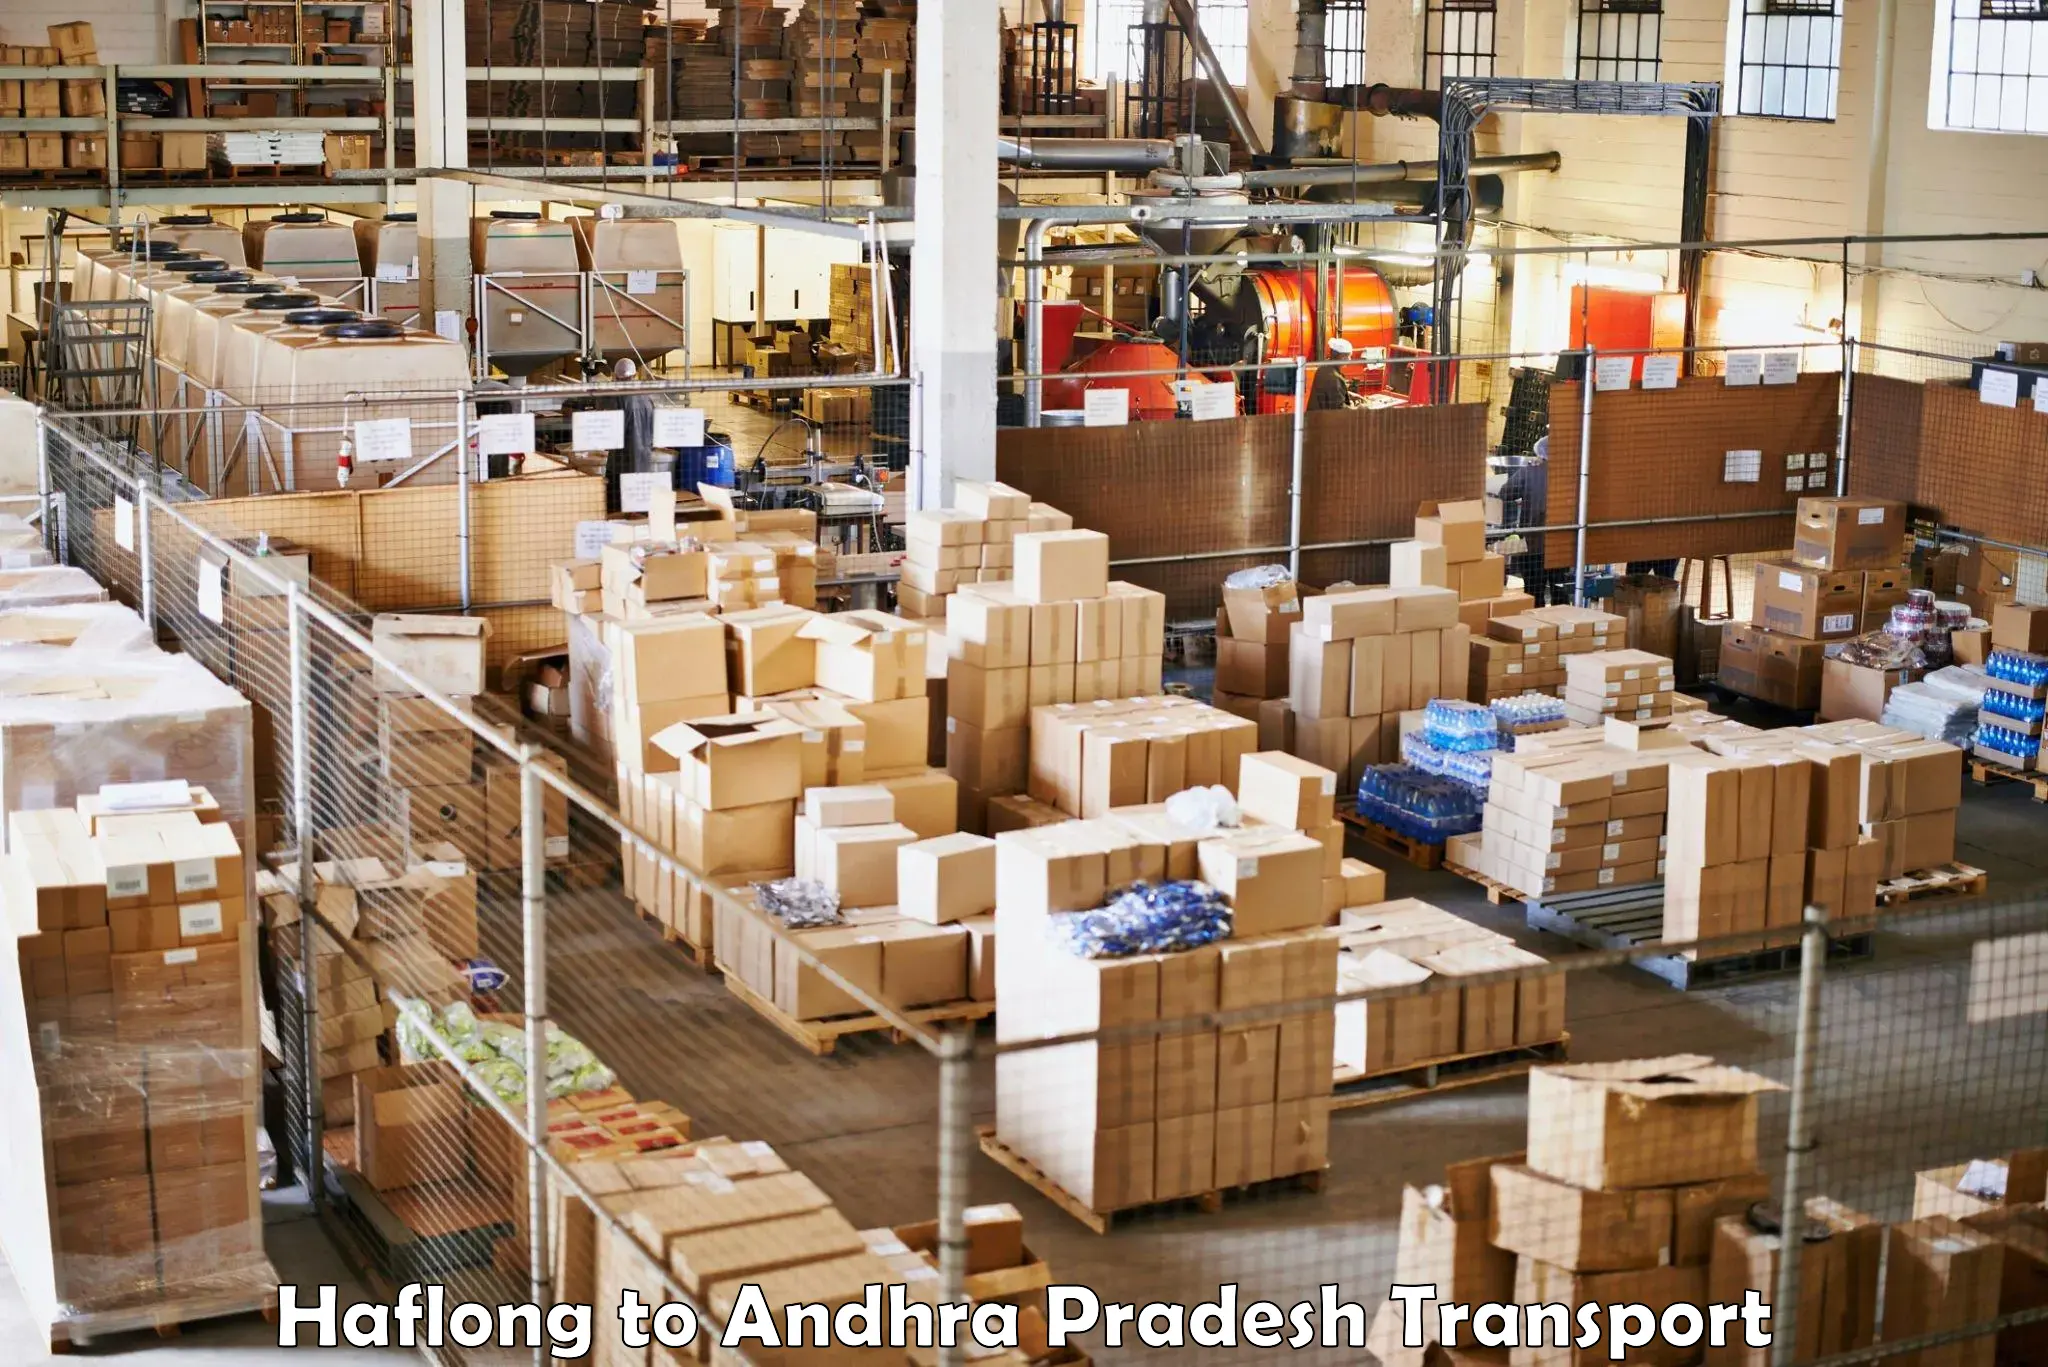 Air freight transport services in Haflong to IIT Tirupati